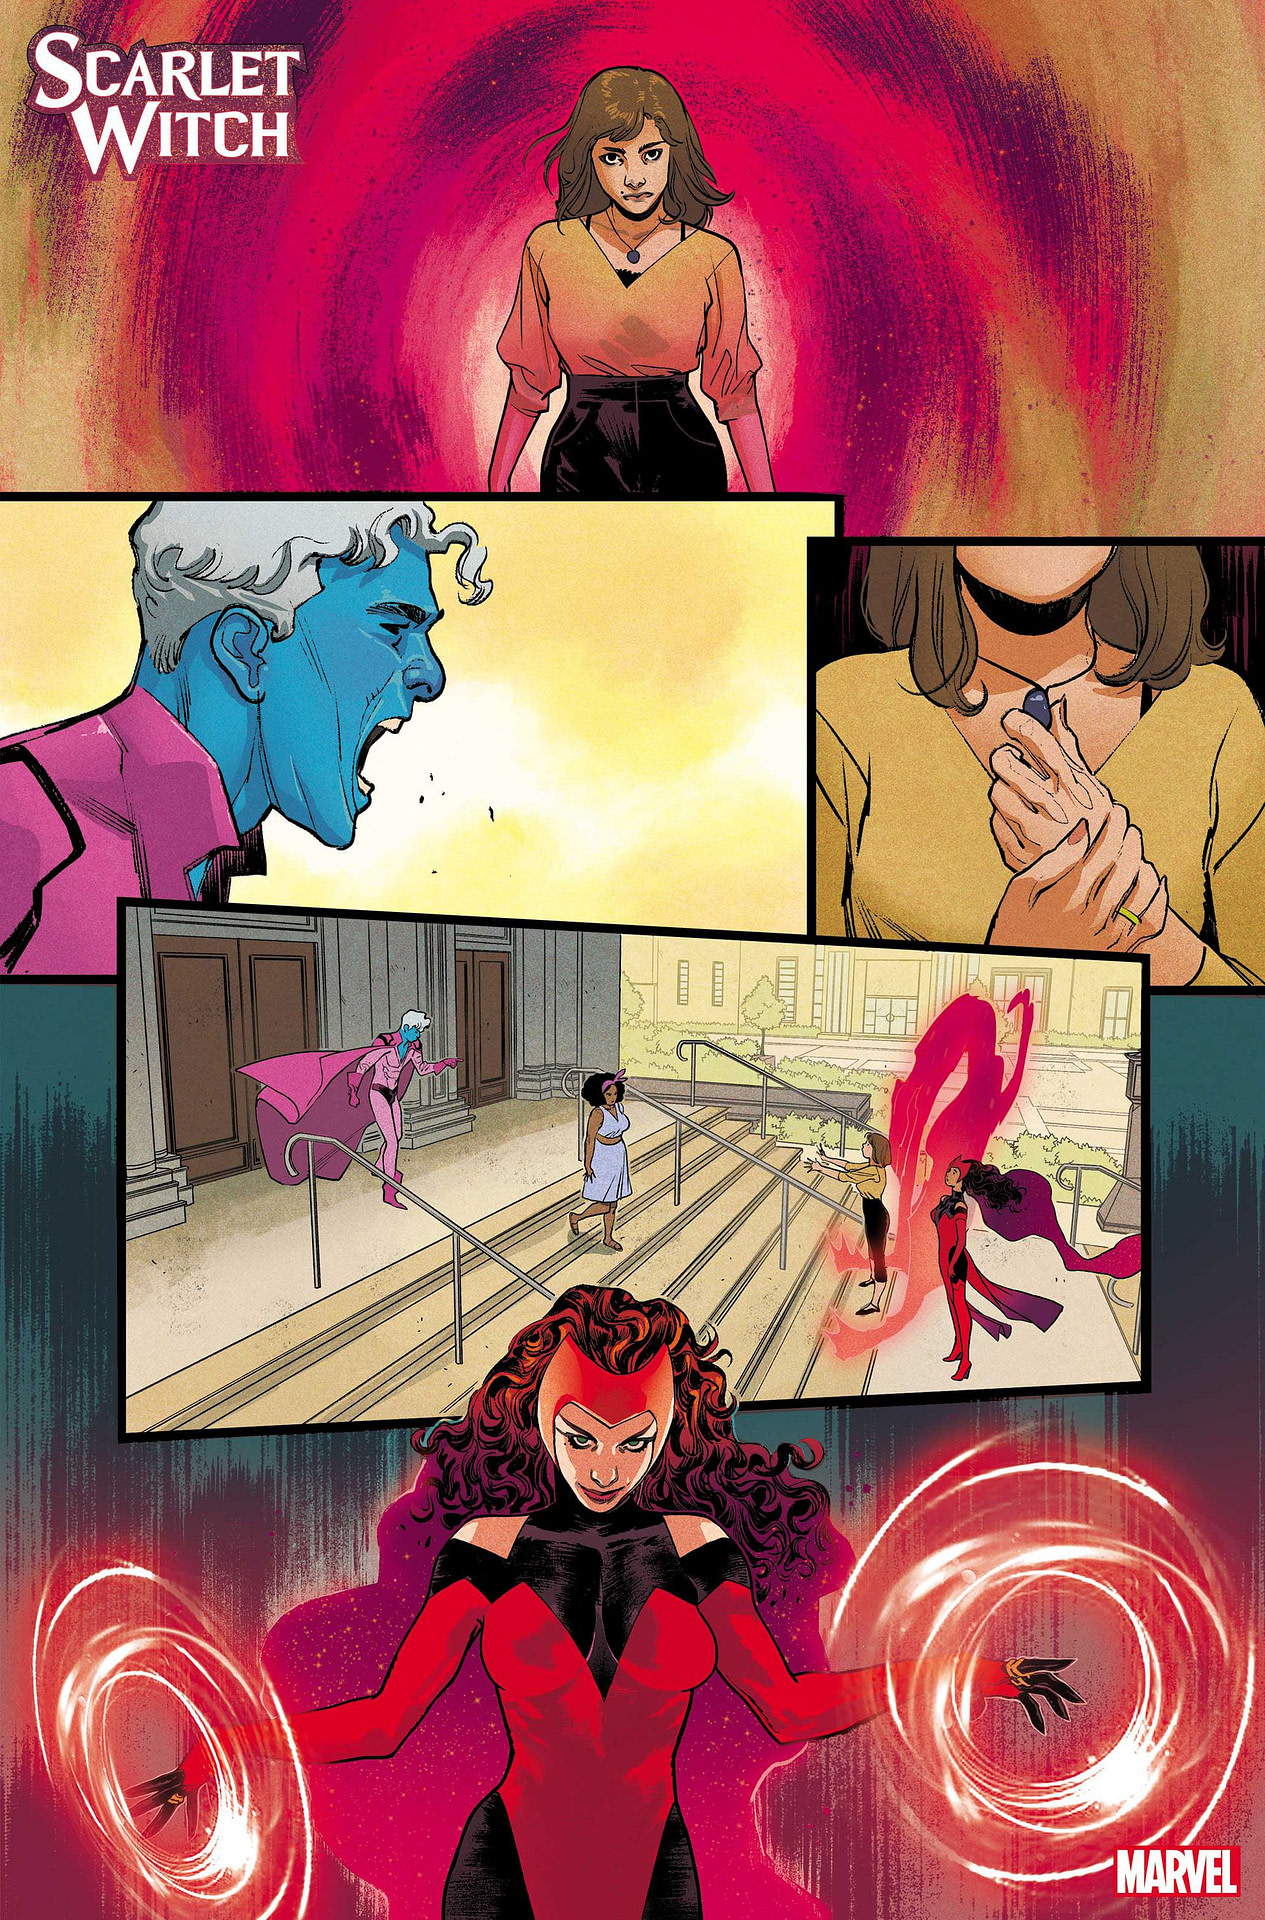 Magic stuff happens between Wanda and a blue-skinned man on some steps in Scarlet Witch #2 (2023). 